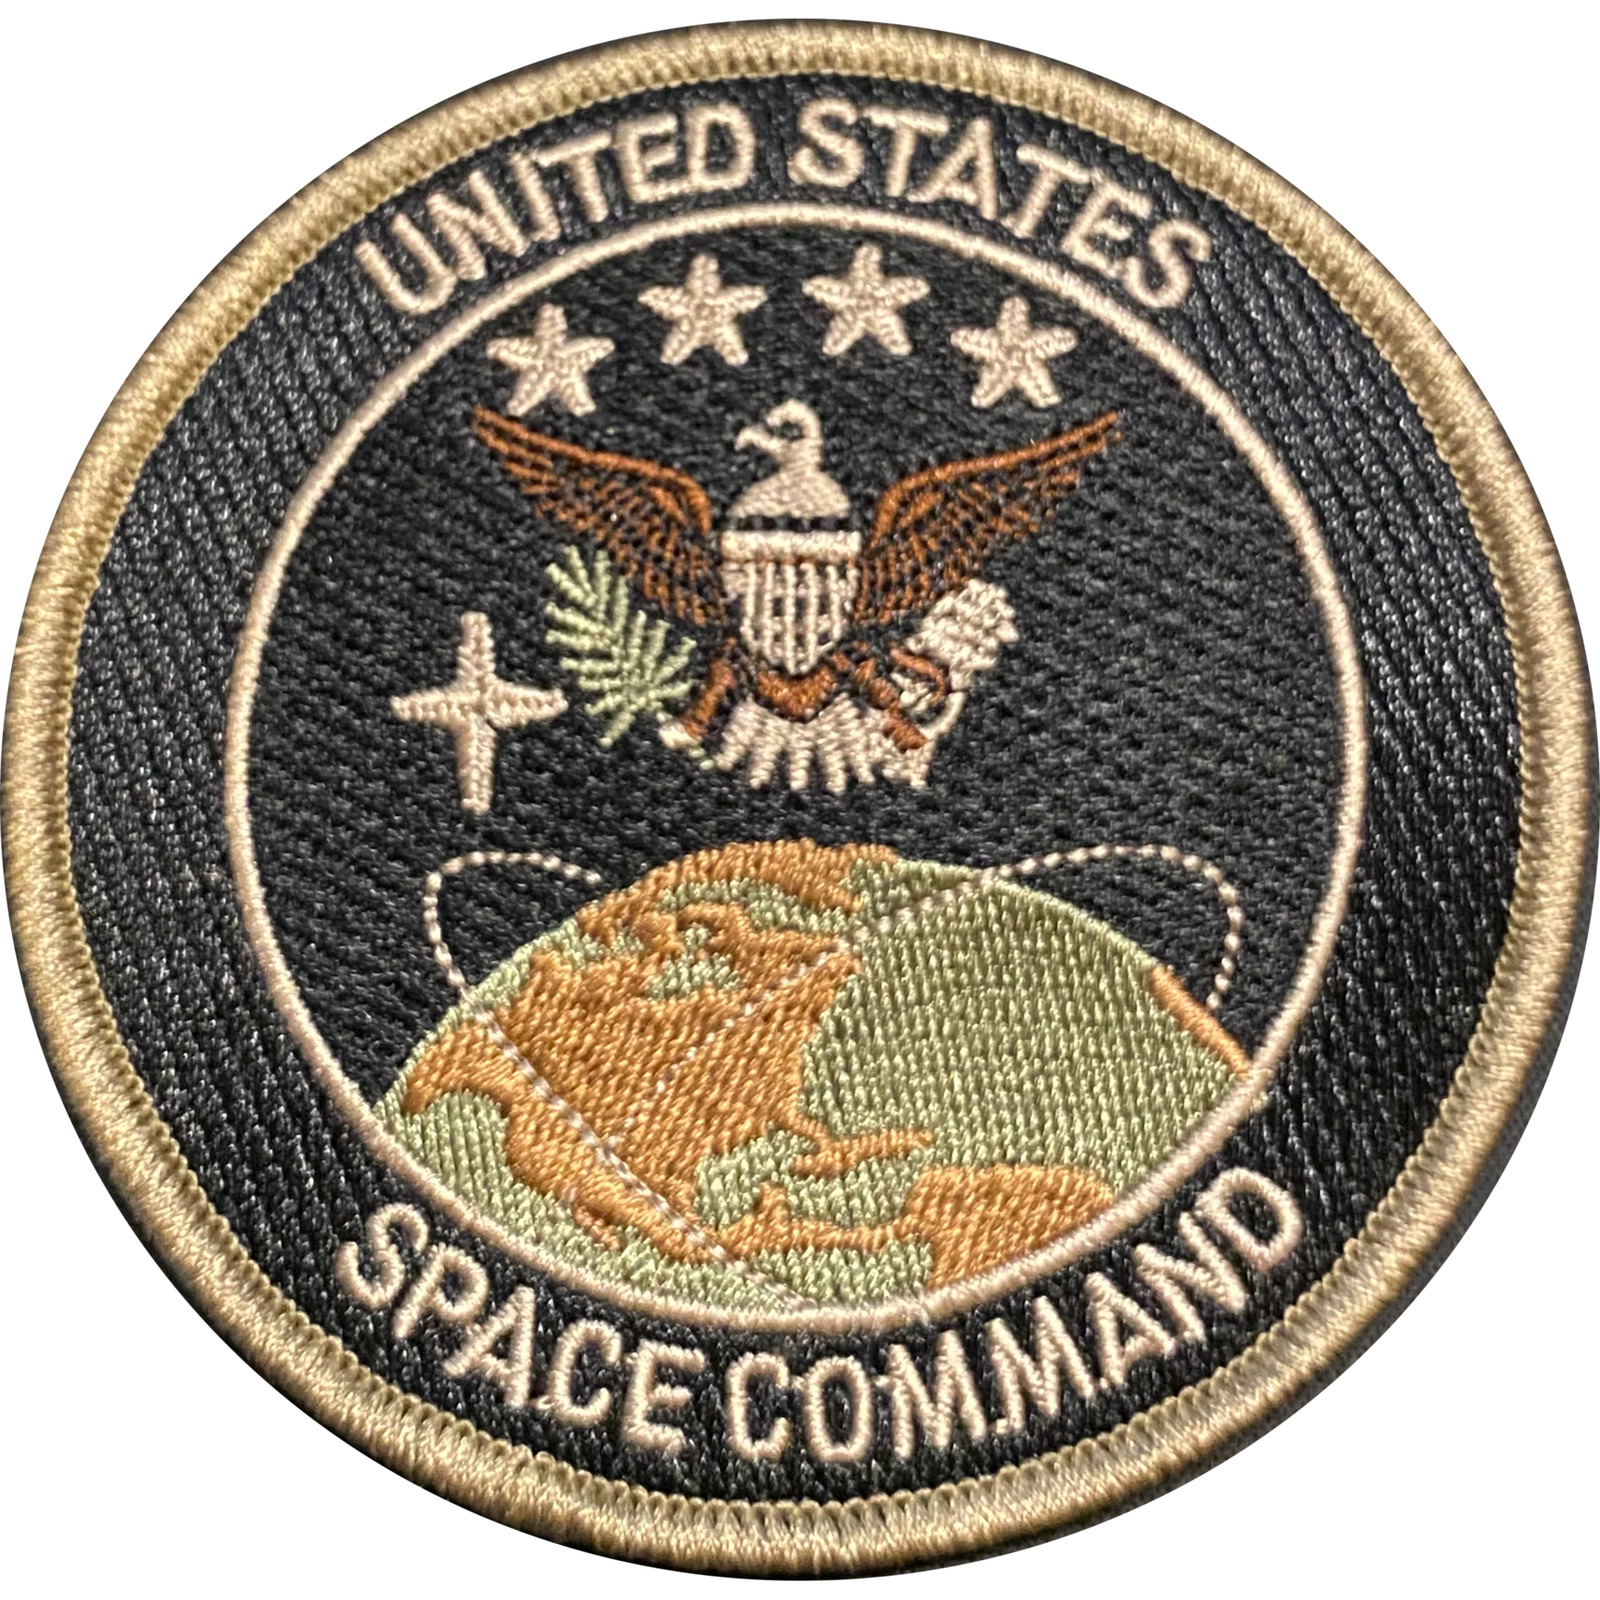 United States Space Command Patch U.S. Space Force CL-018  PAT-226